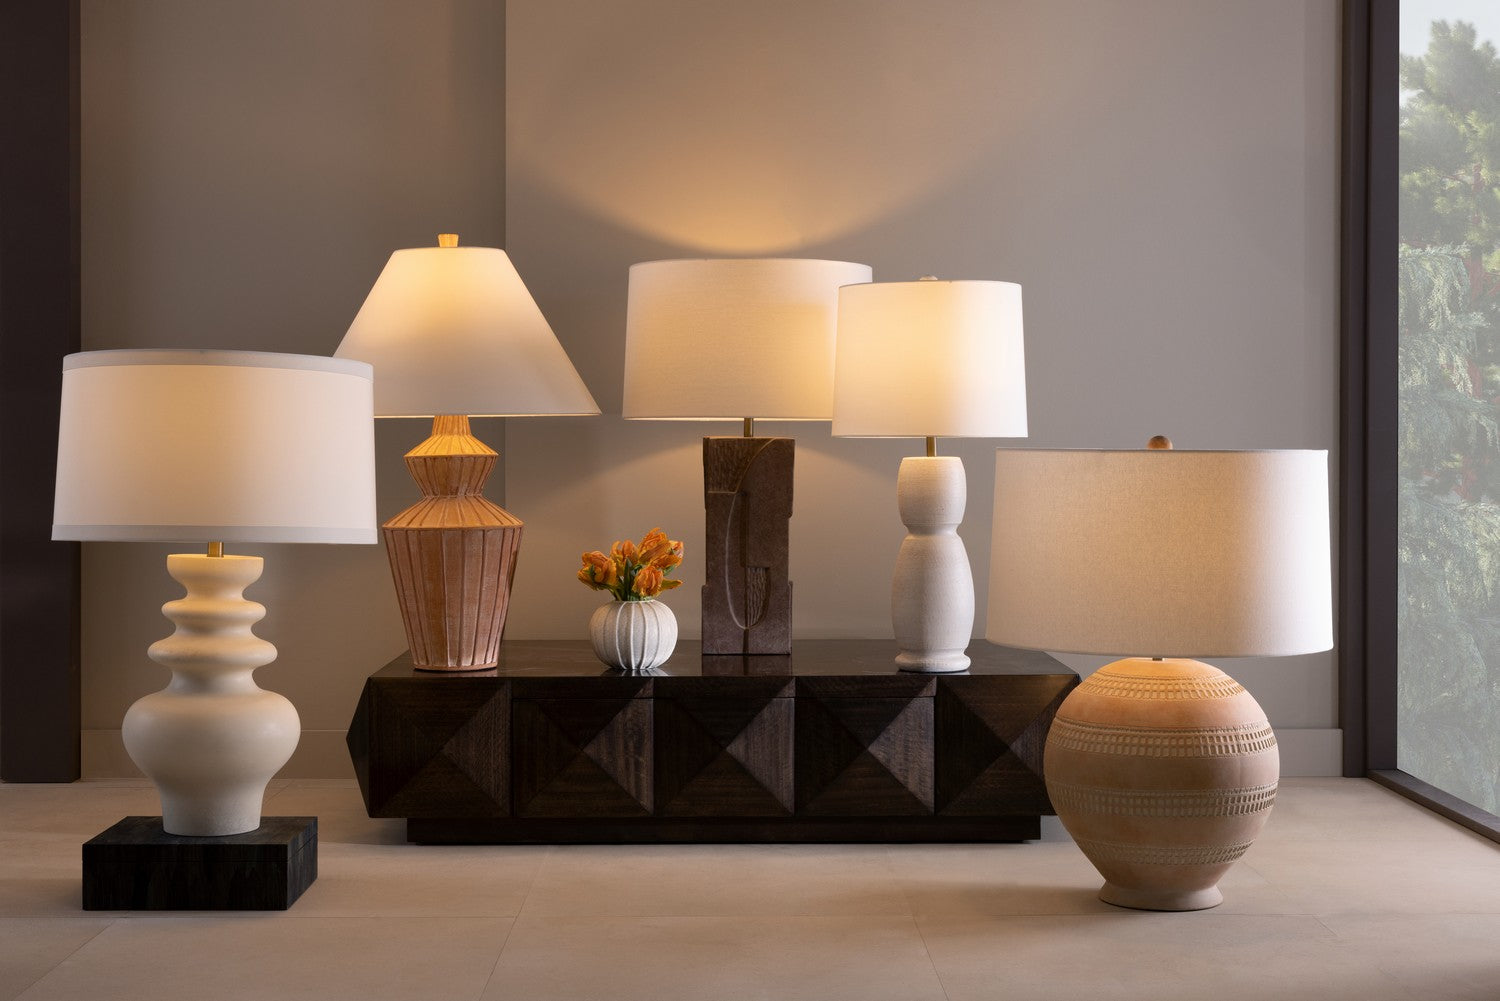 One Light Table Lamp from the Werlow collection in Ivory finish